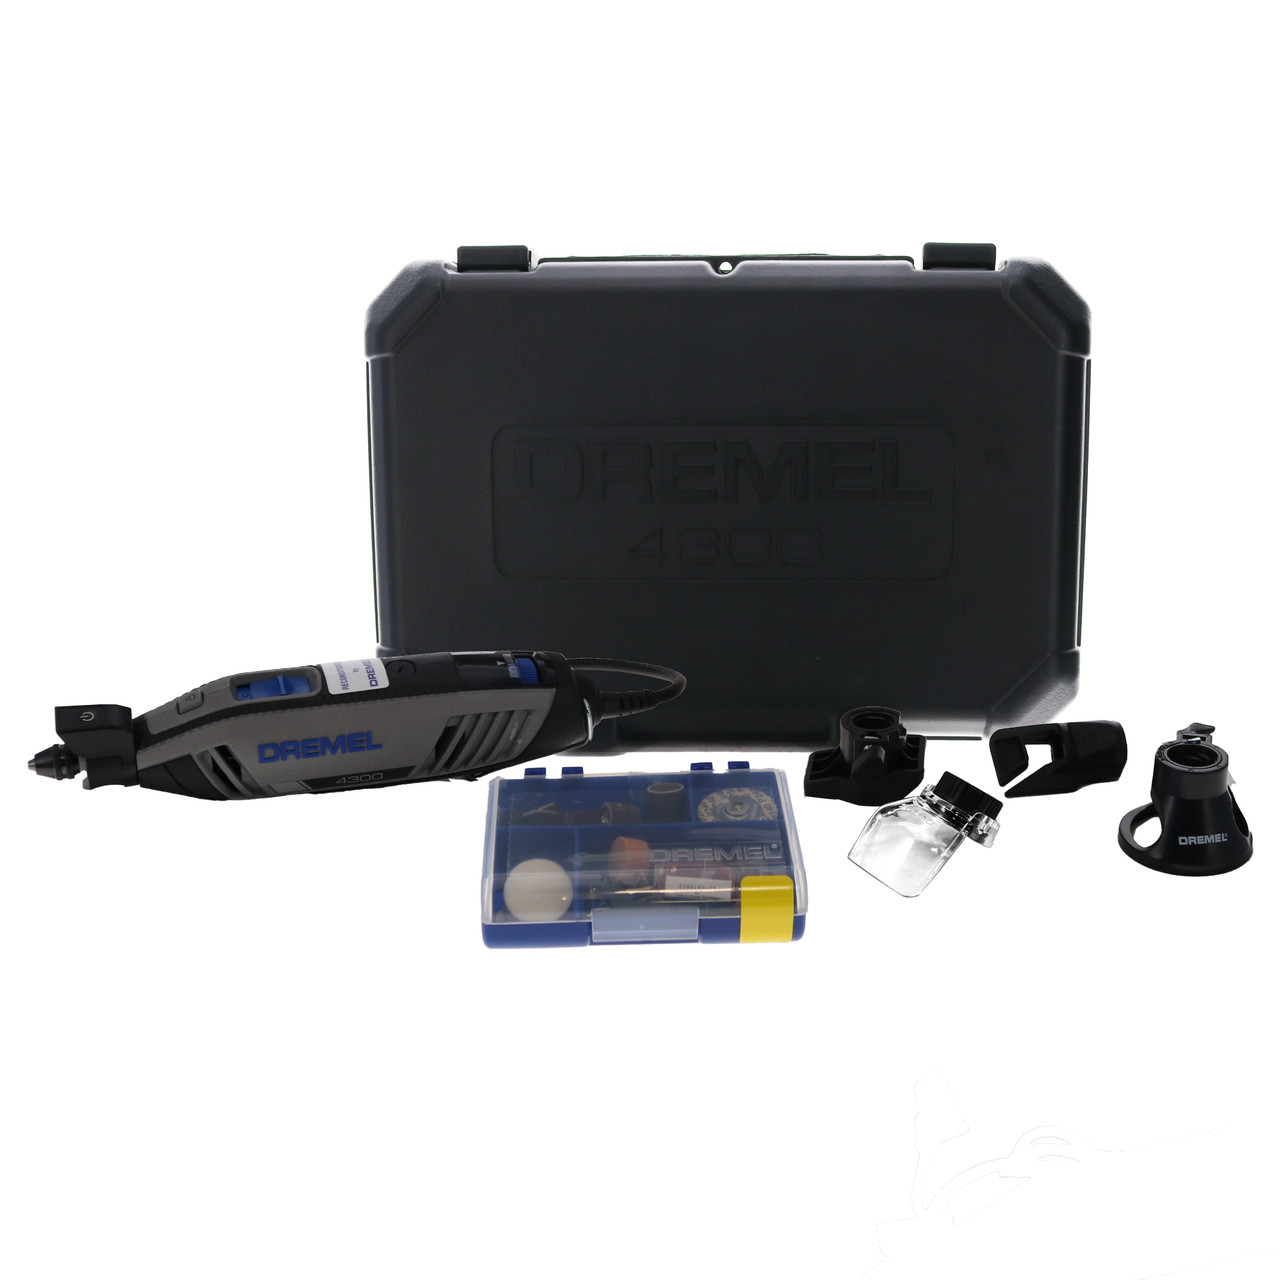 Dremel 4300 Series 1.8 Amp Variable Speed Corded Rotary Tool Kit w/ Mounted  Light, 40 Accessories, 5 Attachments, Carrying Case 4300-5/40 - The Home  Depot